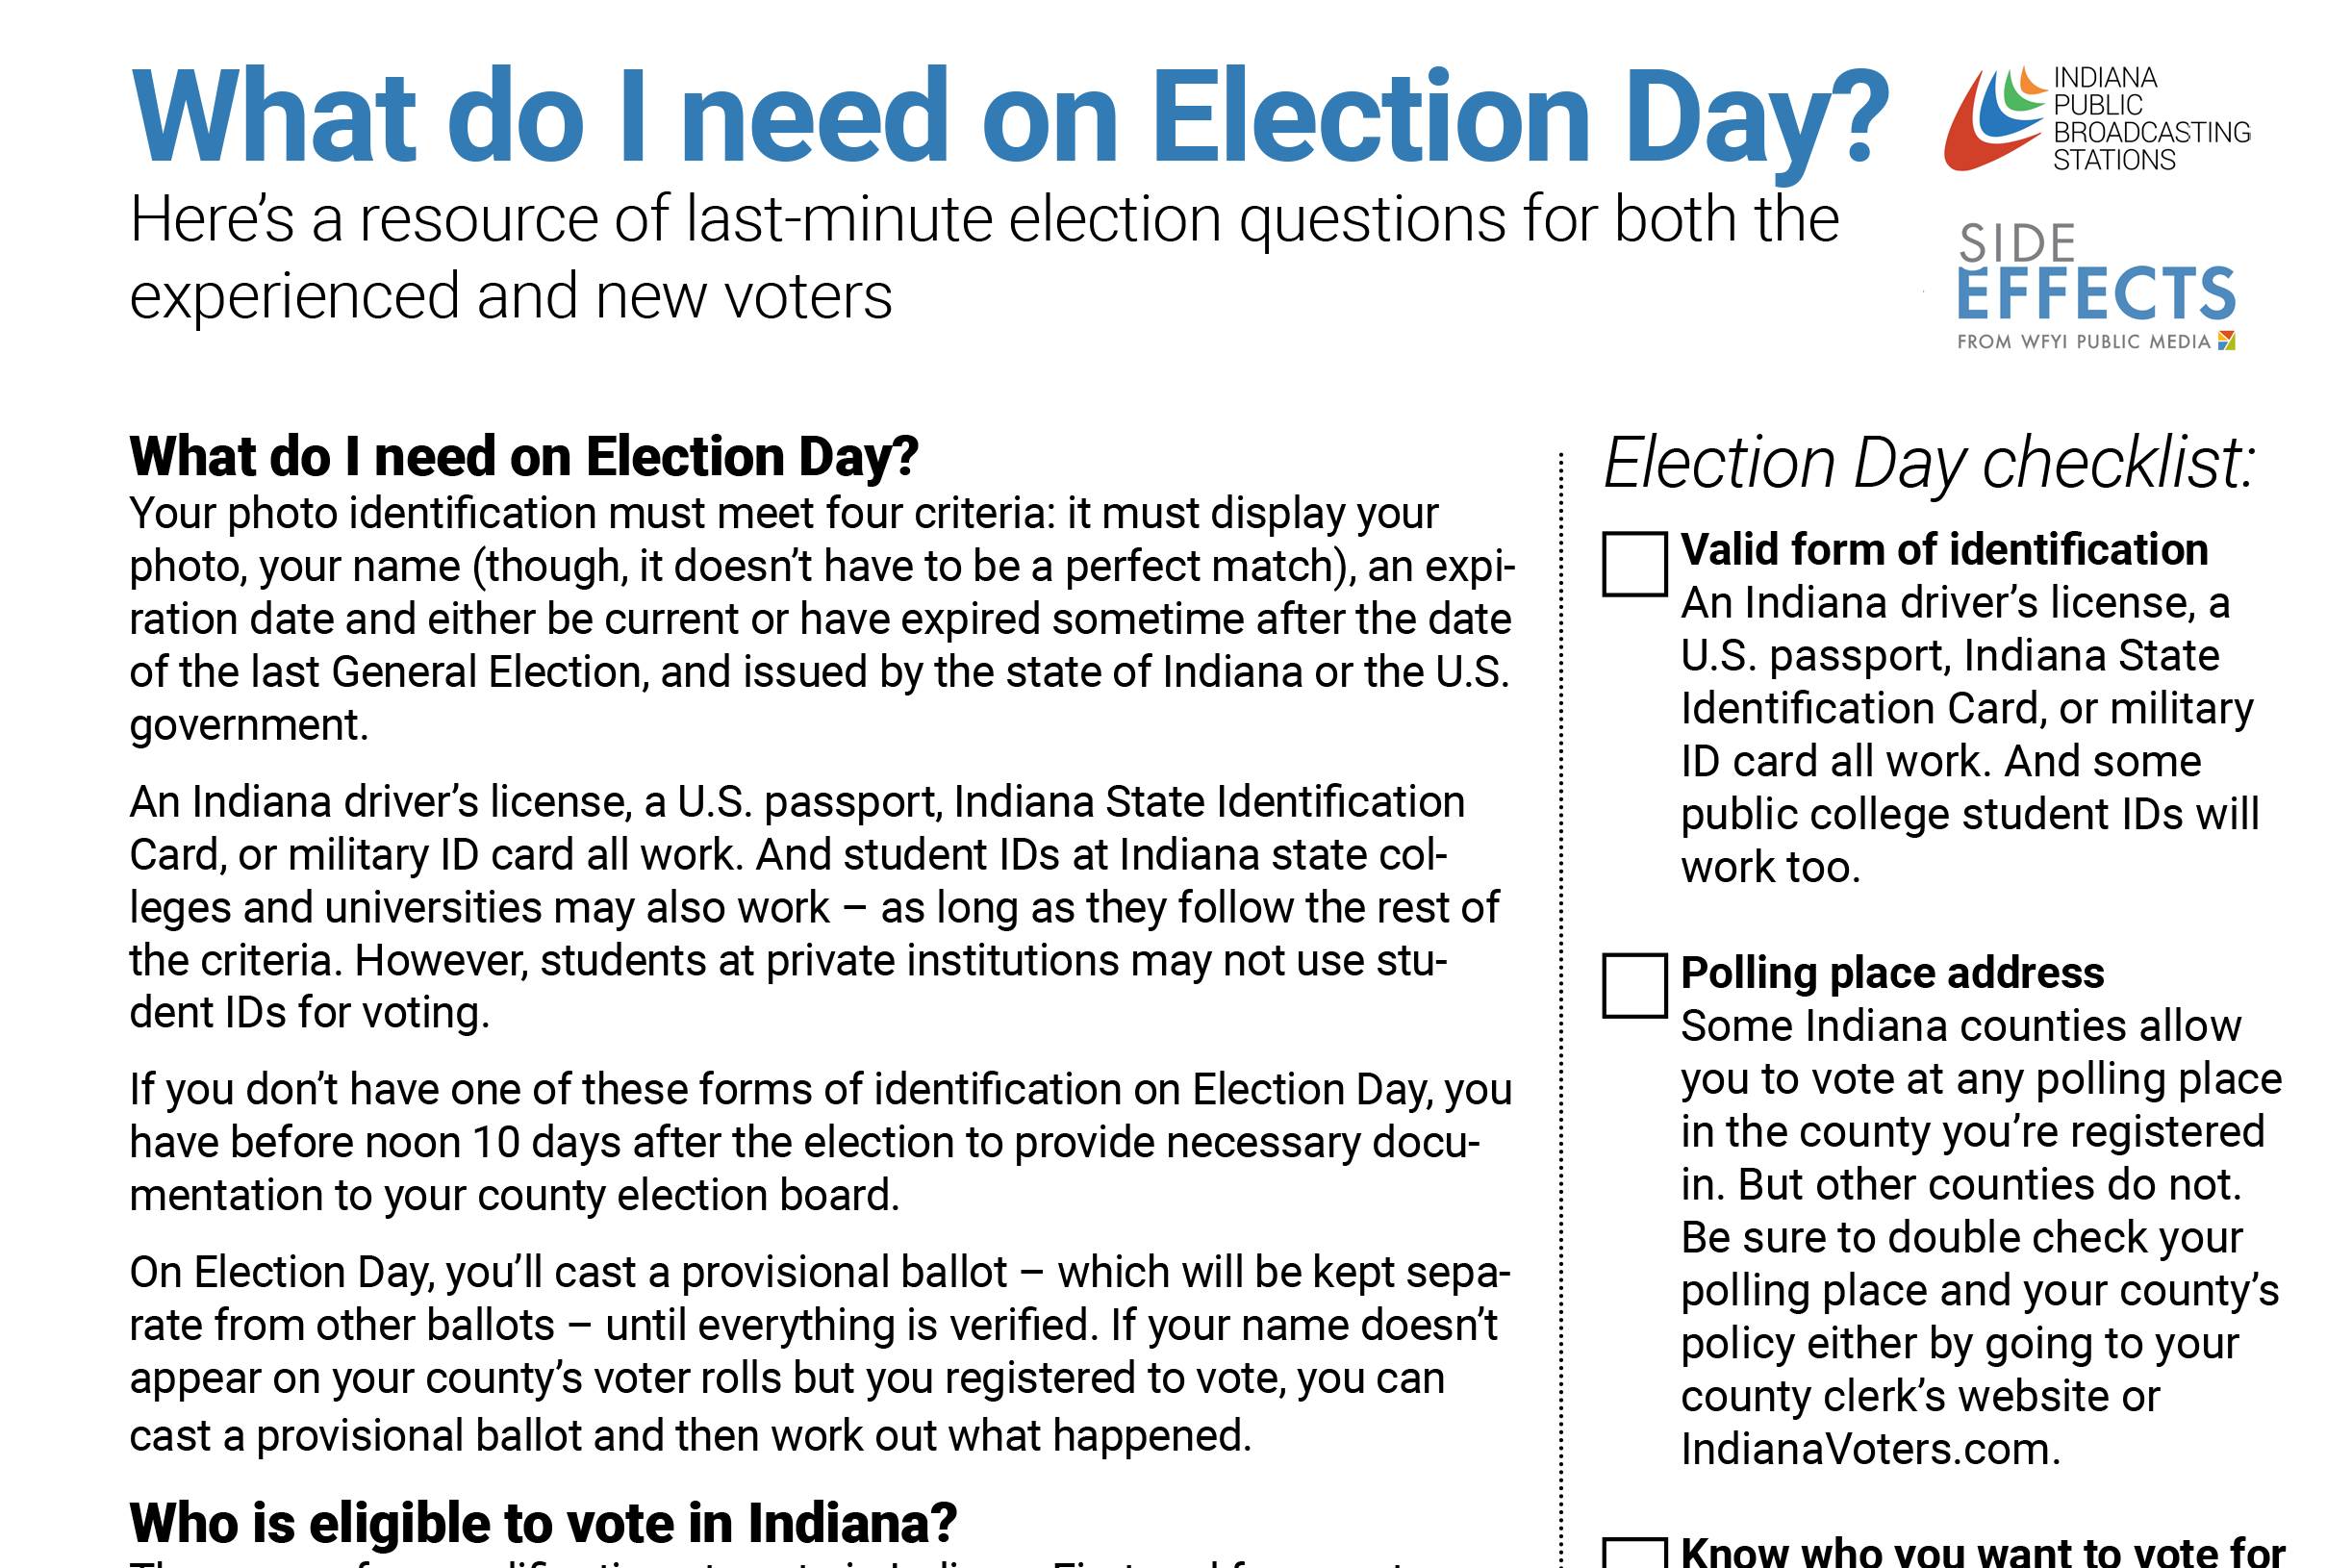 A screenshot the Election Day tip sheet. It is available as a PDF. If you're using a screen reader and it is not working, email lchapman@wfyi.org and I will personally send you the text of the document and fix that issue.